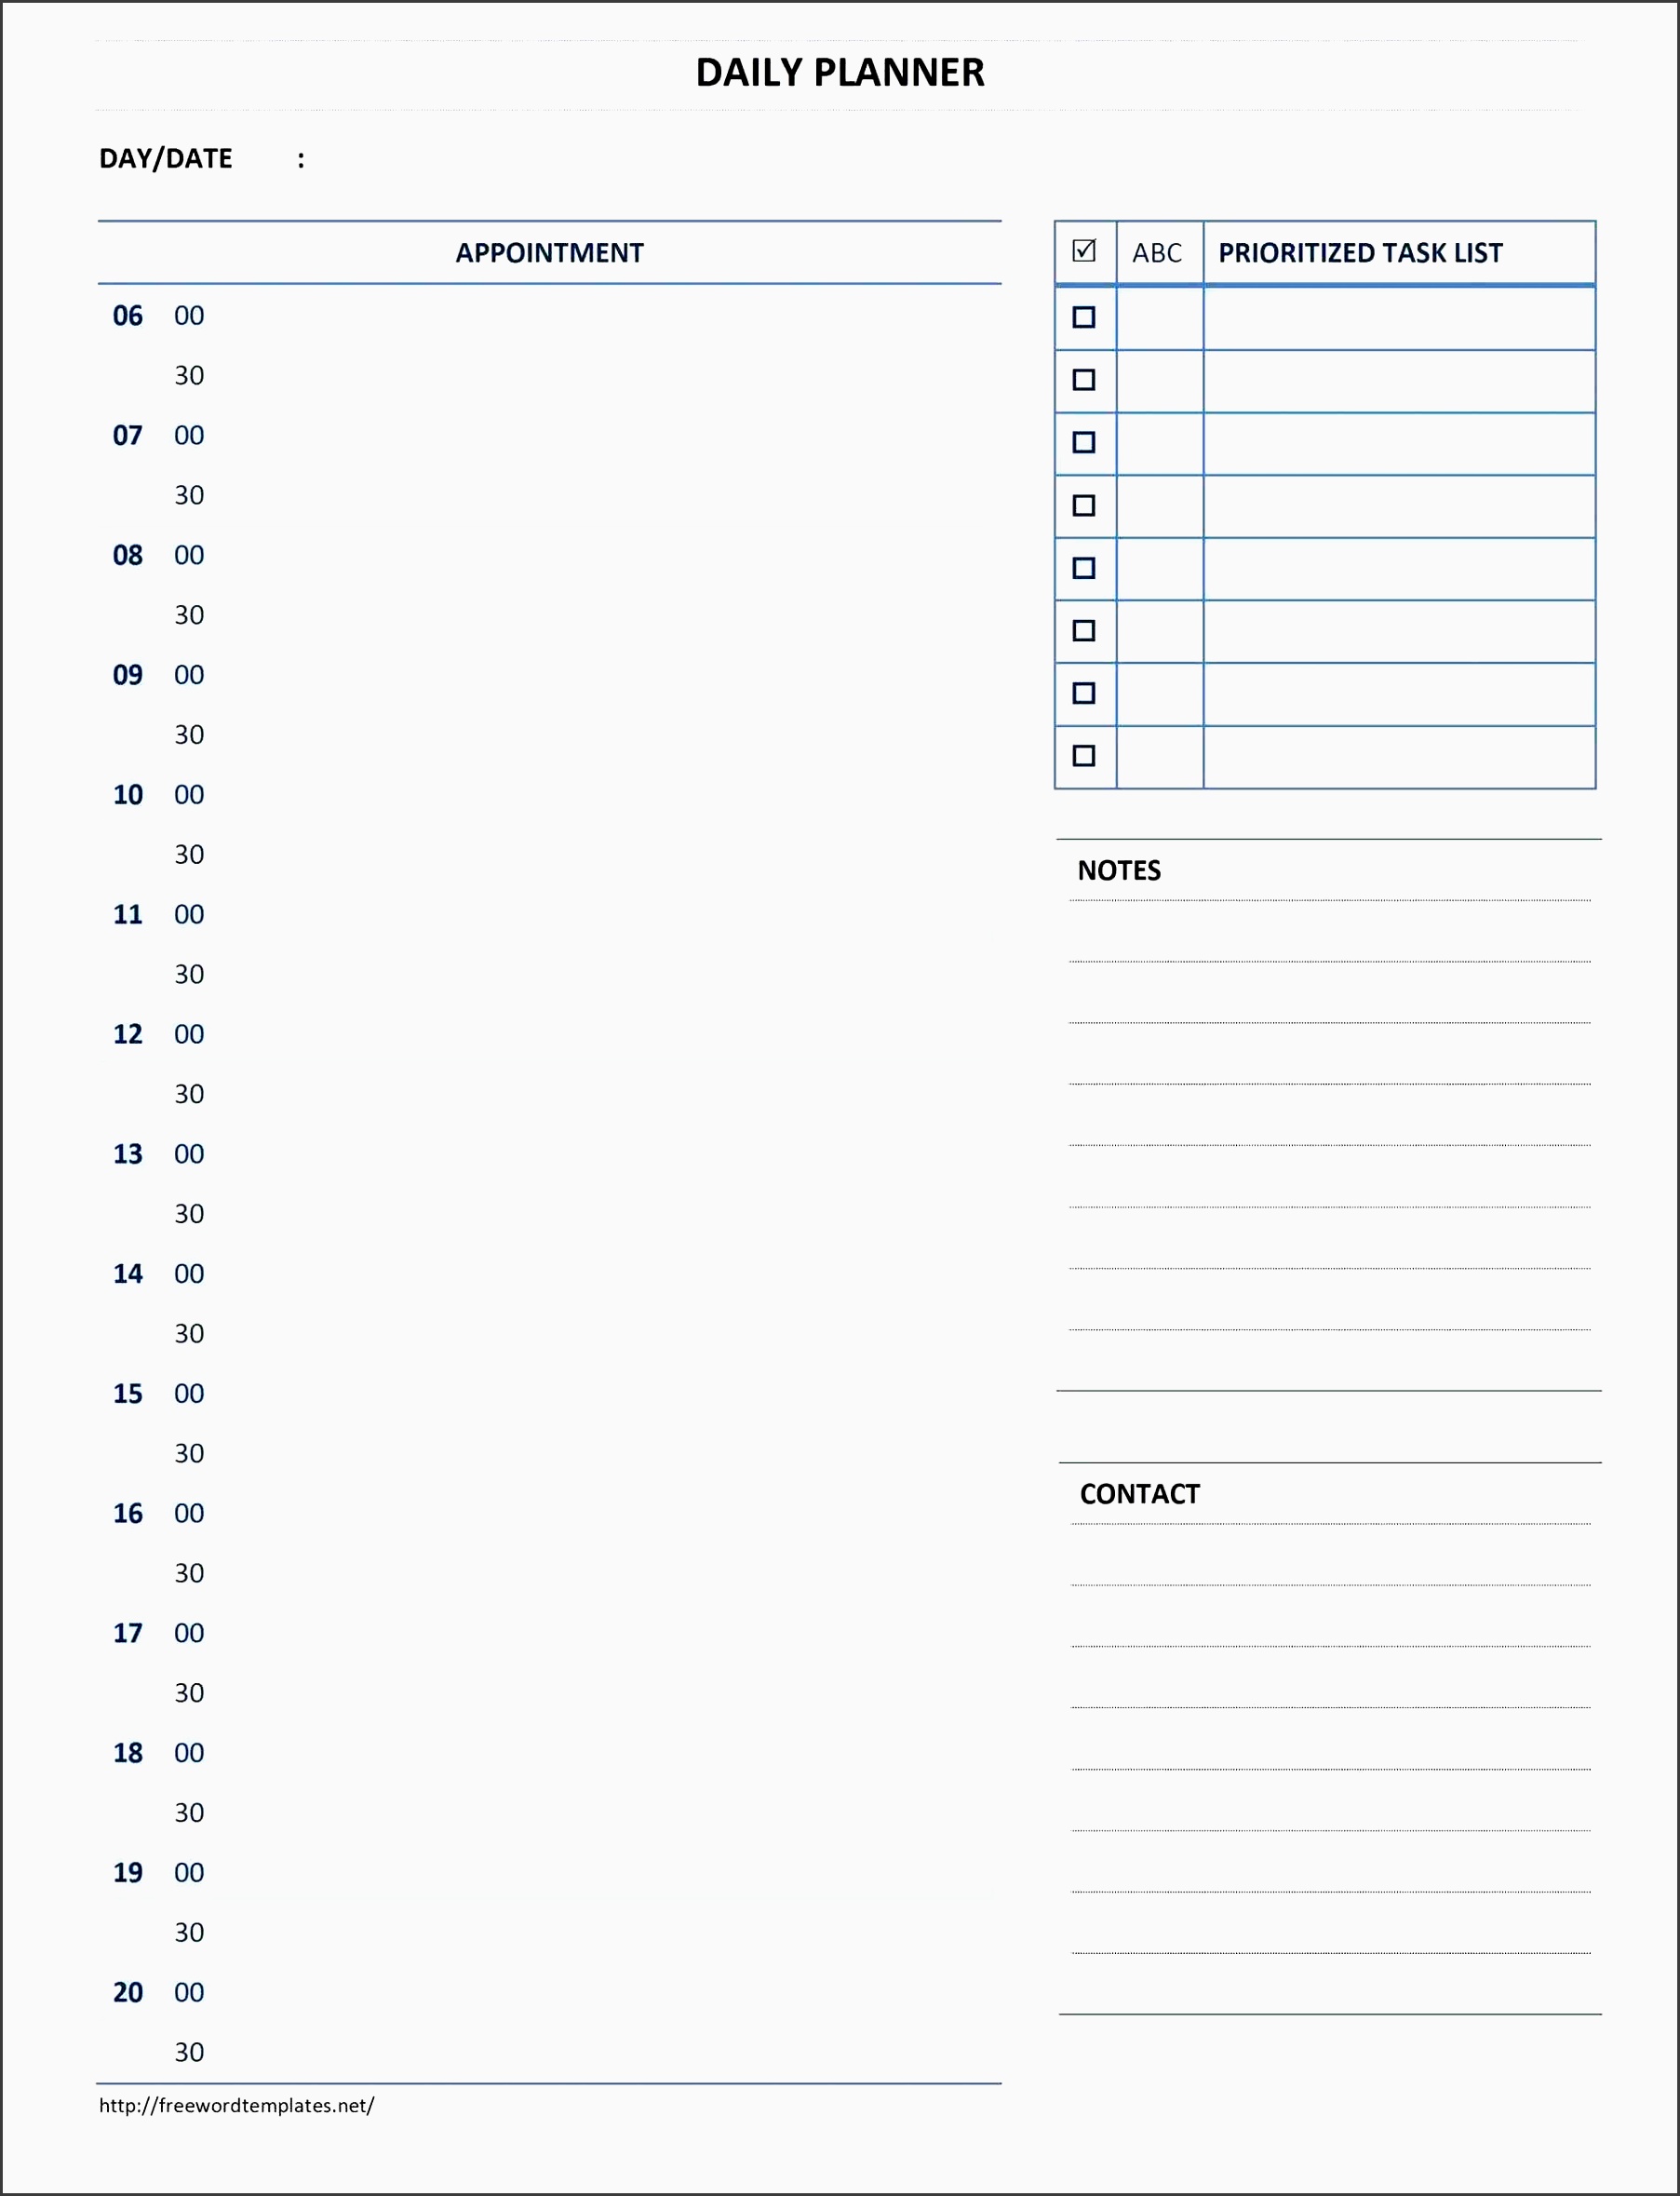 image photo baby shower planner template t registry at kissui image real simple bridal shower photo